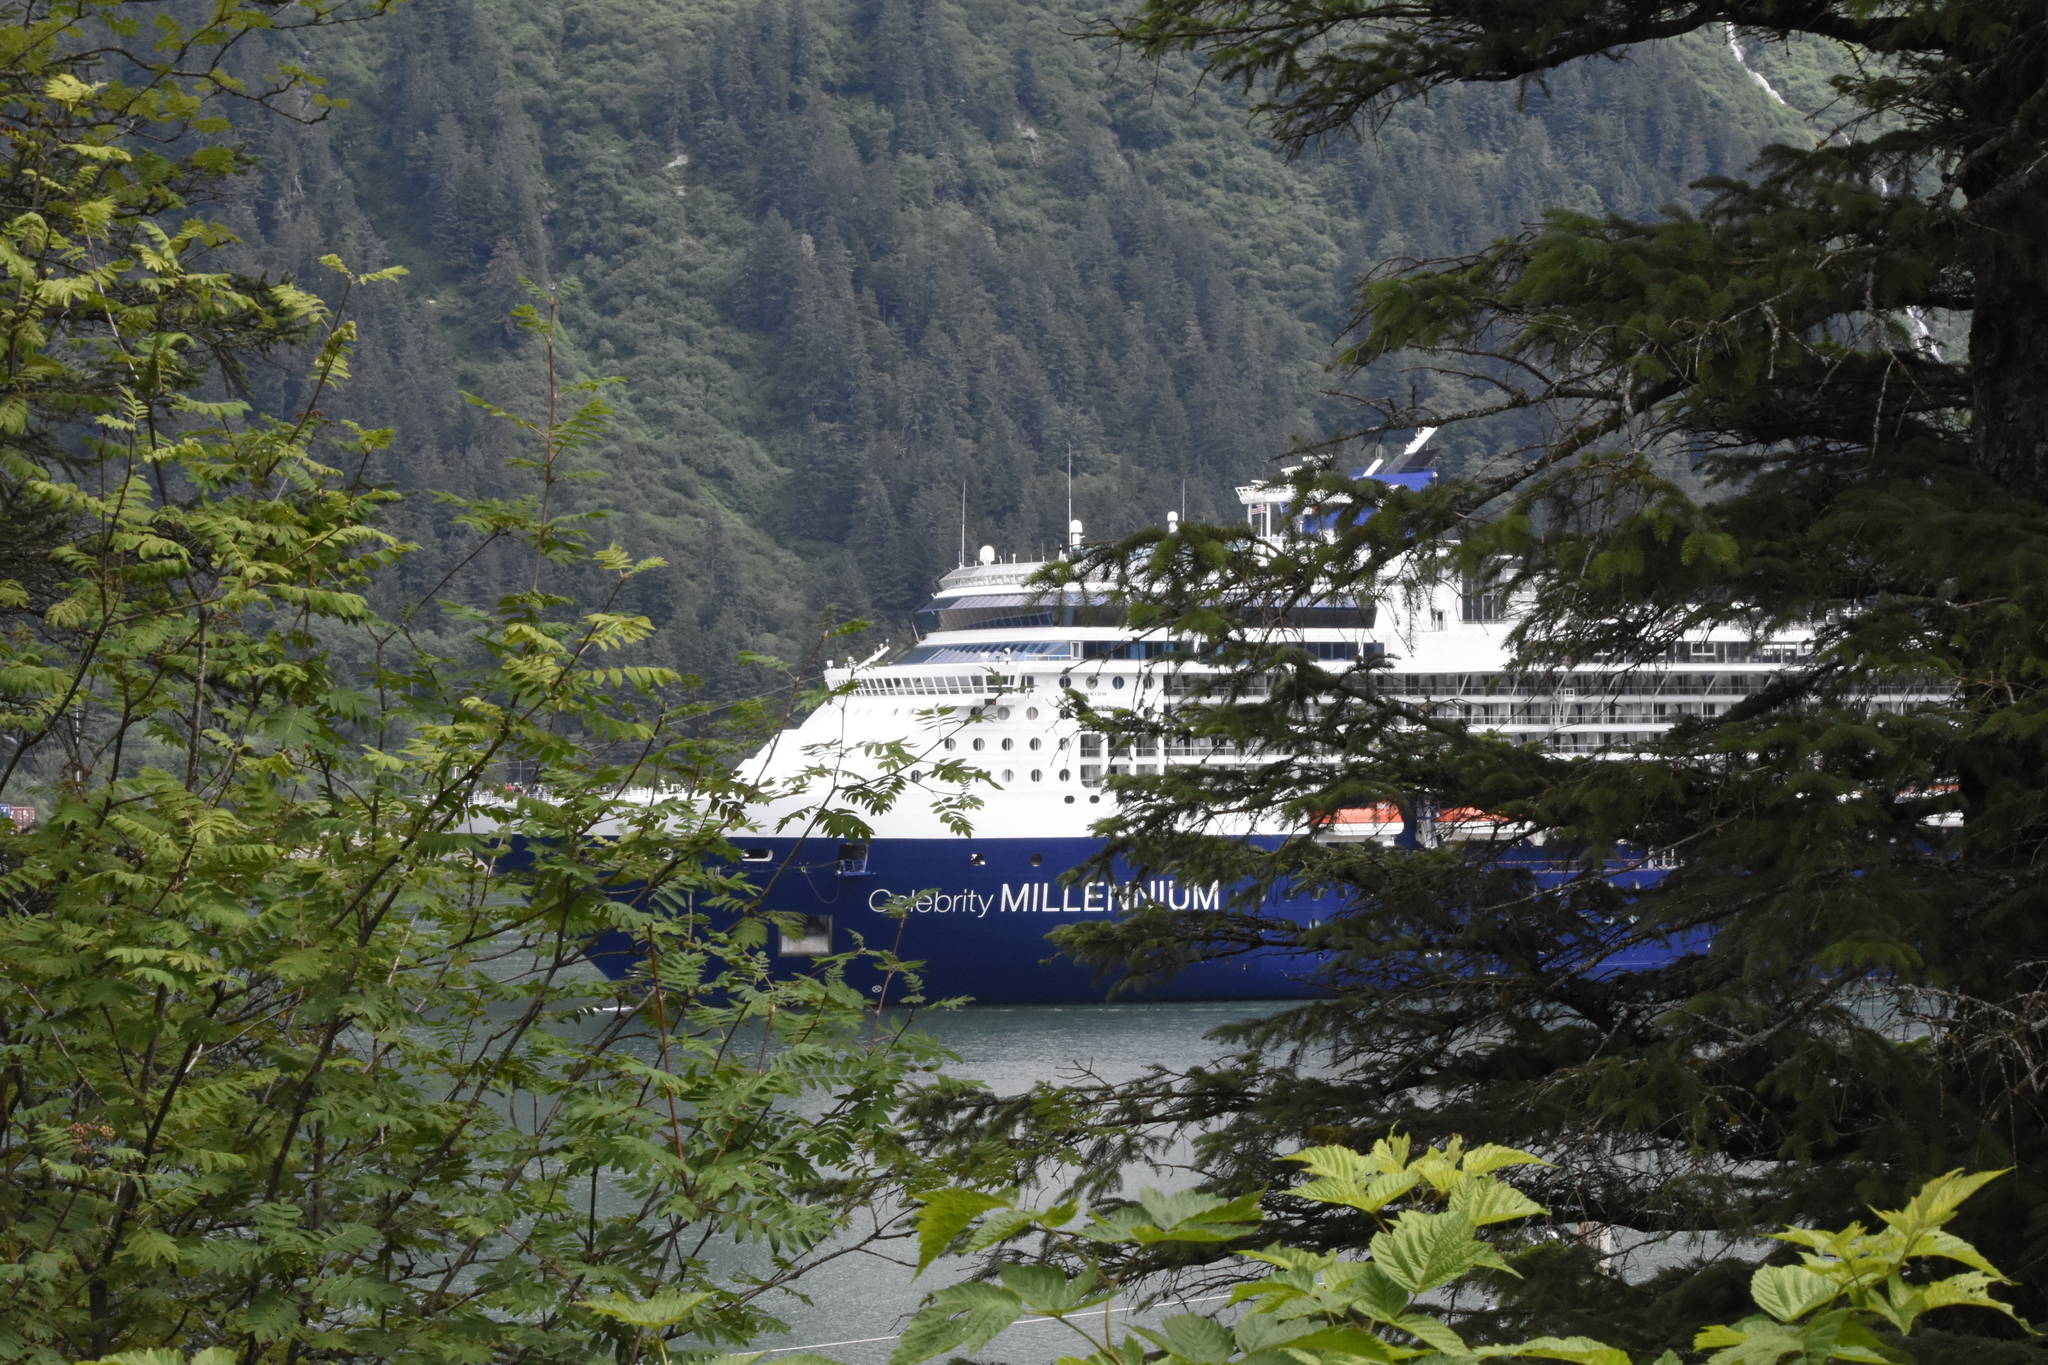 This July 26 photo shows the Celebrity Millennium in Juneau. (Peter Segall / Juneau Empire)